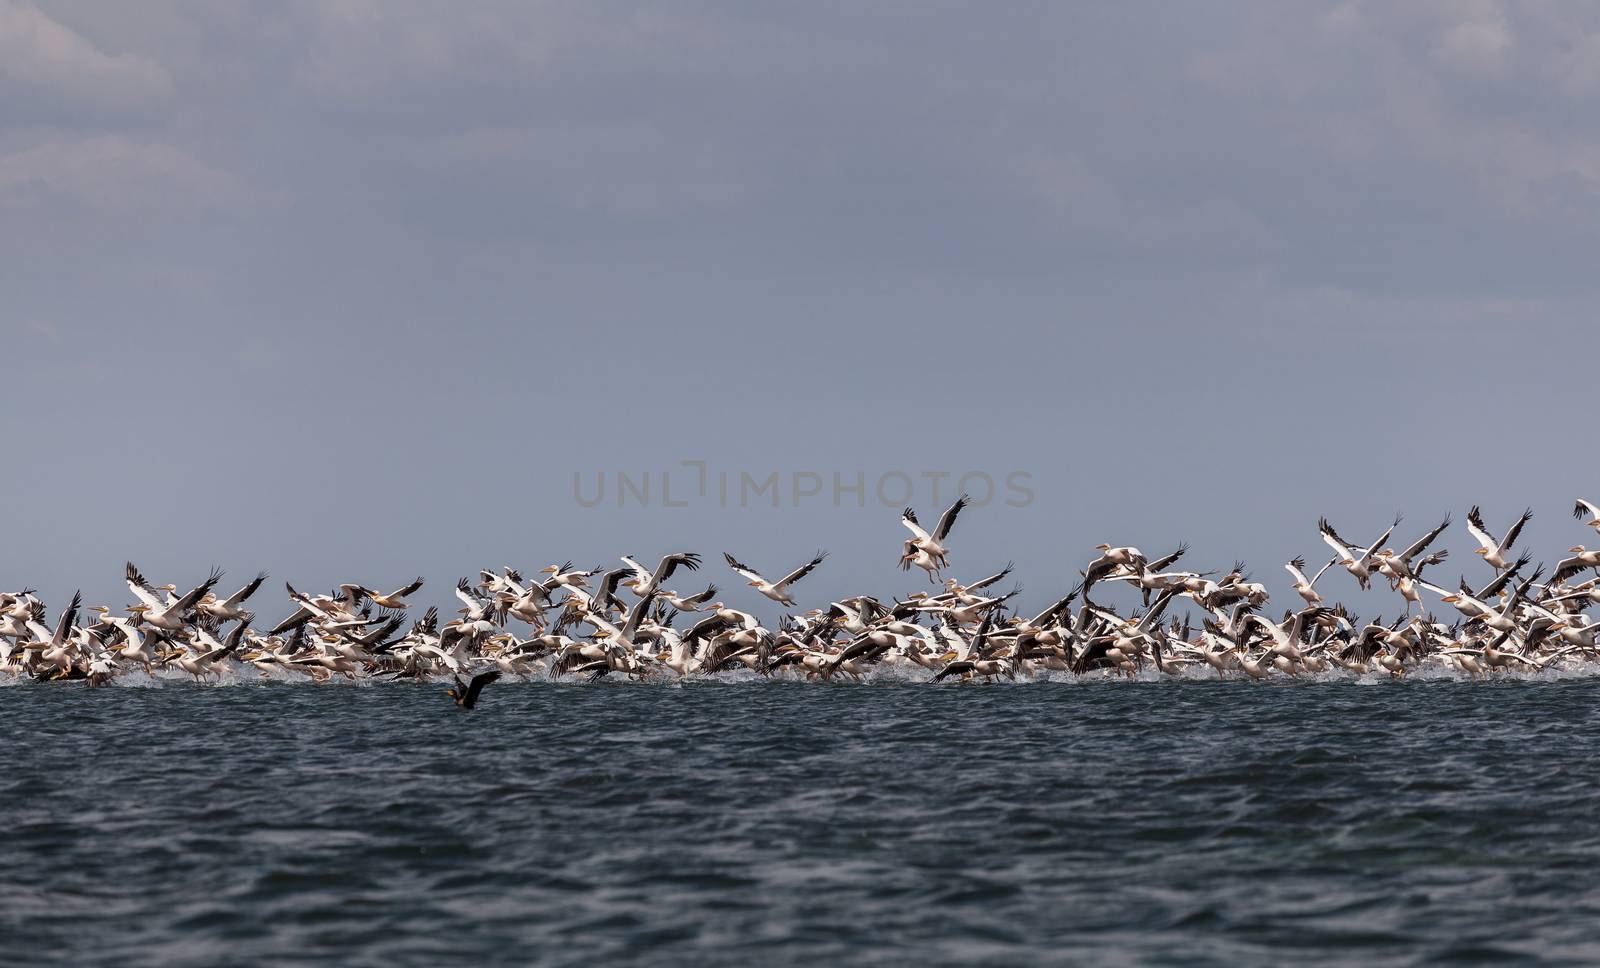 A flock of pink pelicans take off from the surface of the sea